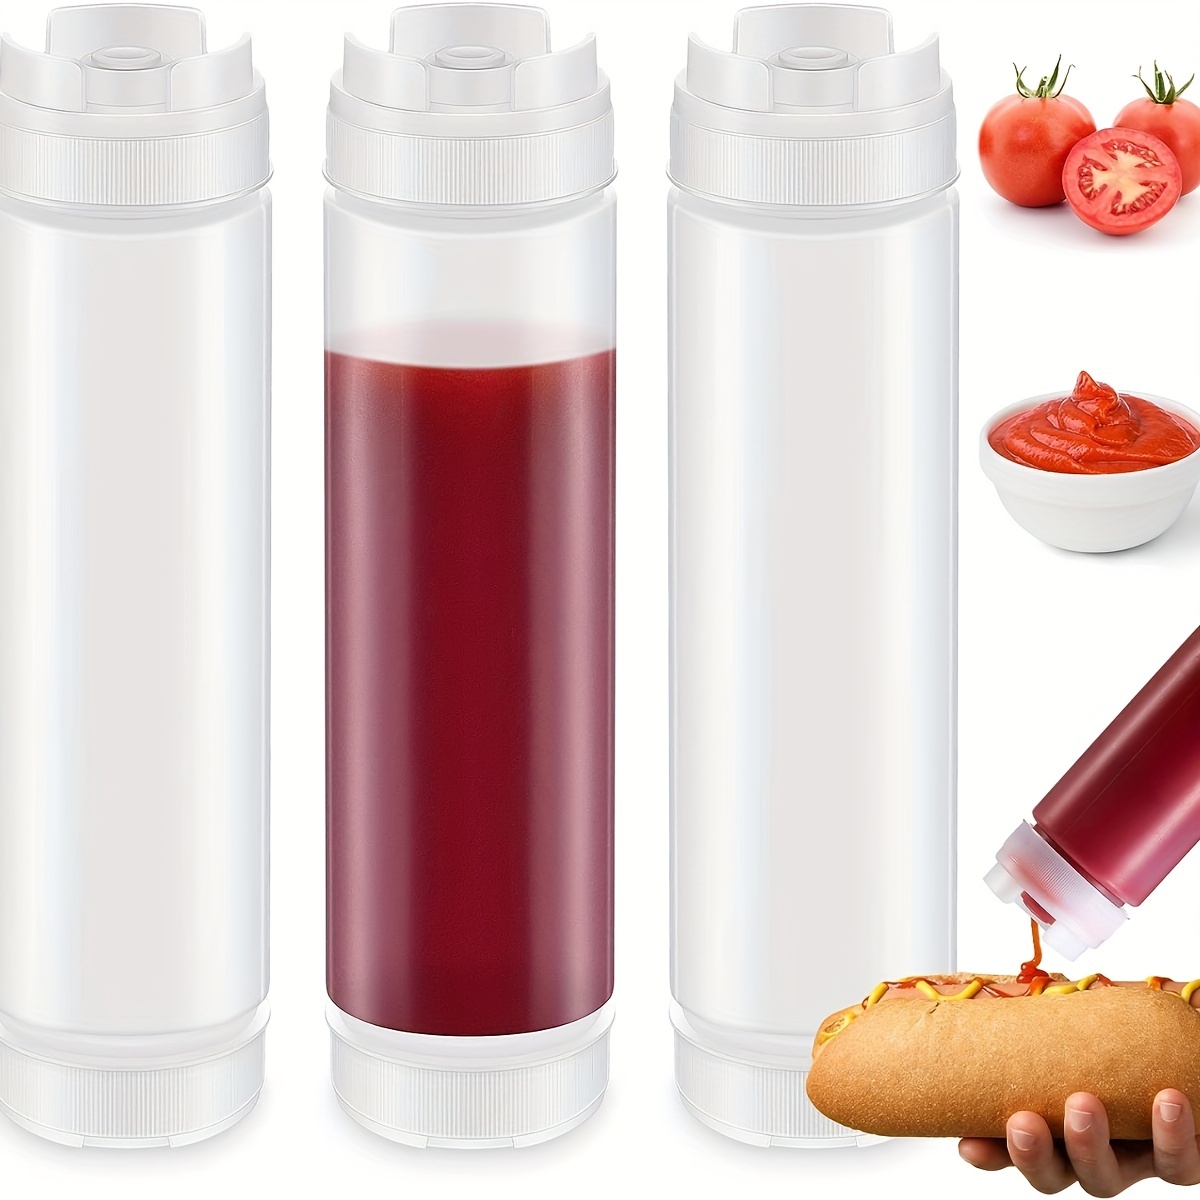 24 Pcs 8 oz Plastic Condiment Squeeze Bottles Squeeze Leak Proof  Multipurpose Squirt Bottles with Twist Top Cap for Sauces Ketchup BBQ Syrup  Dressings